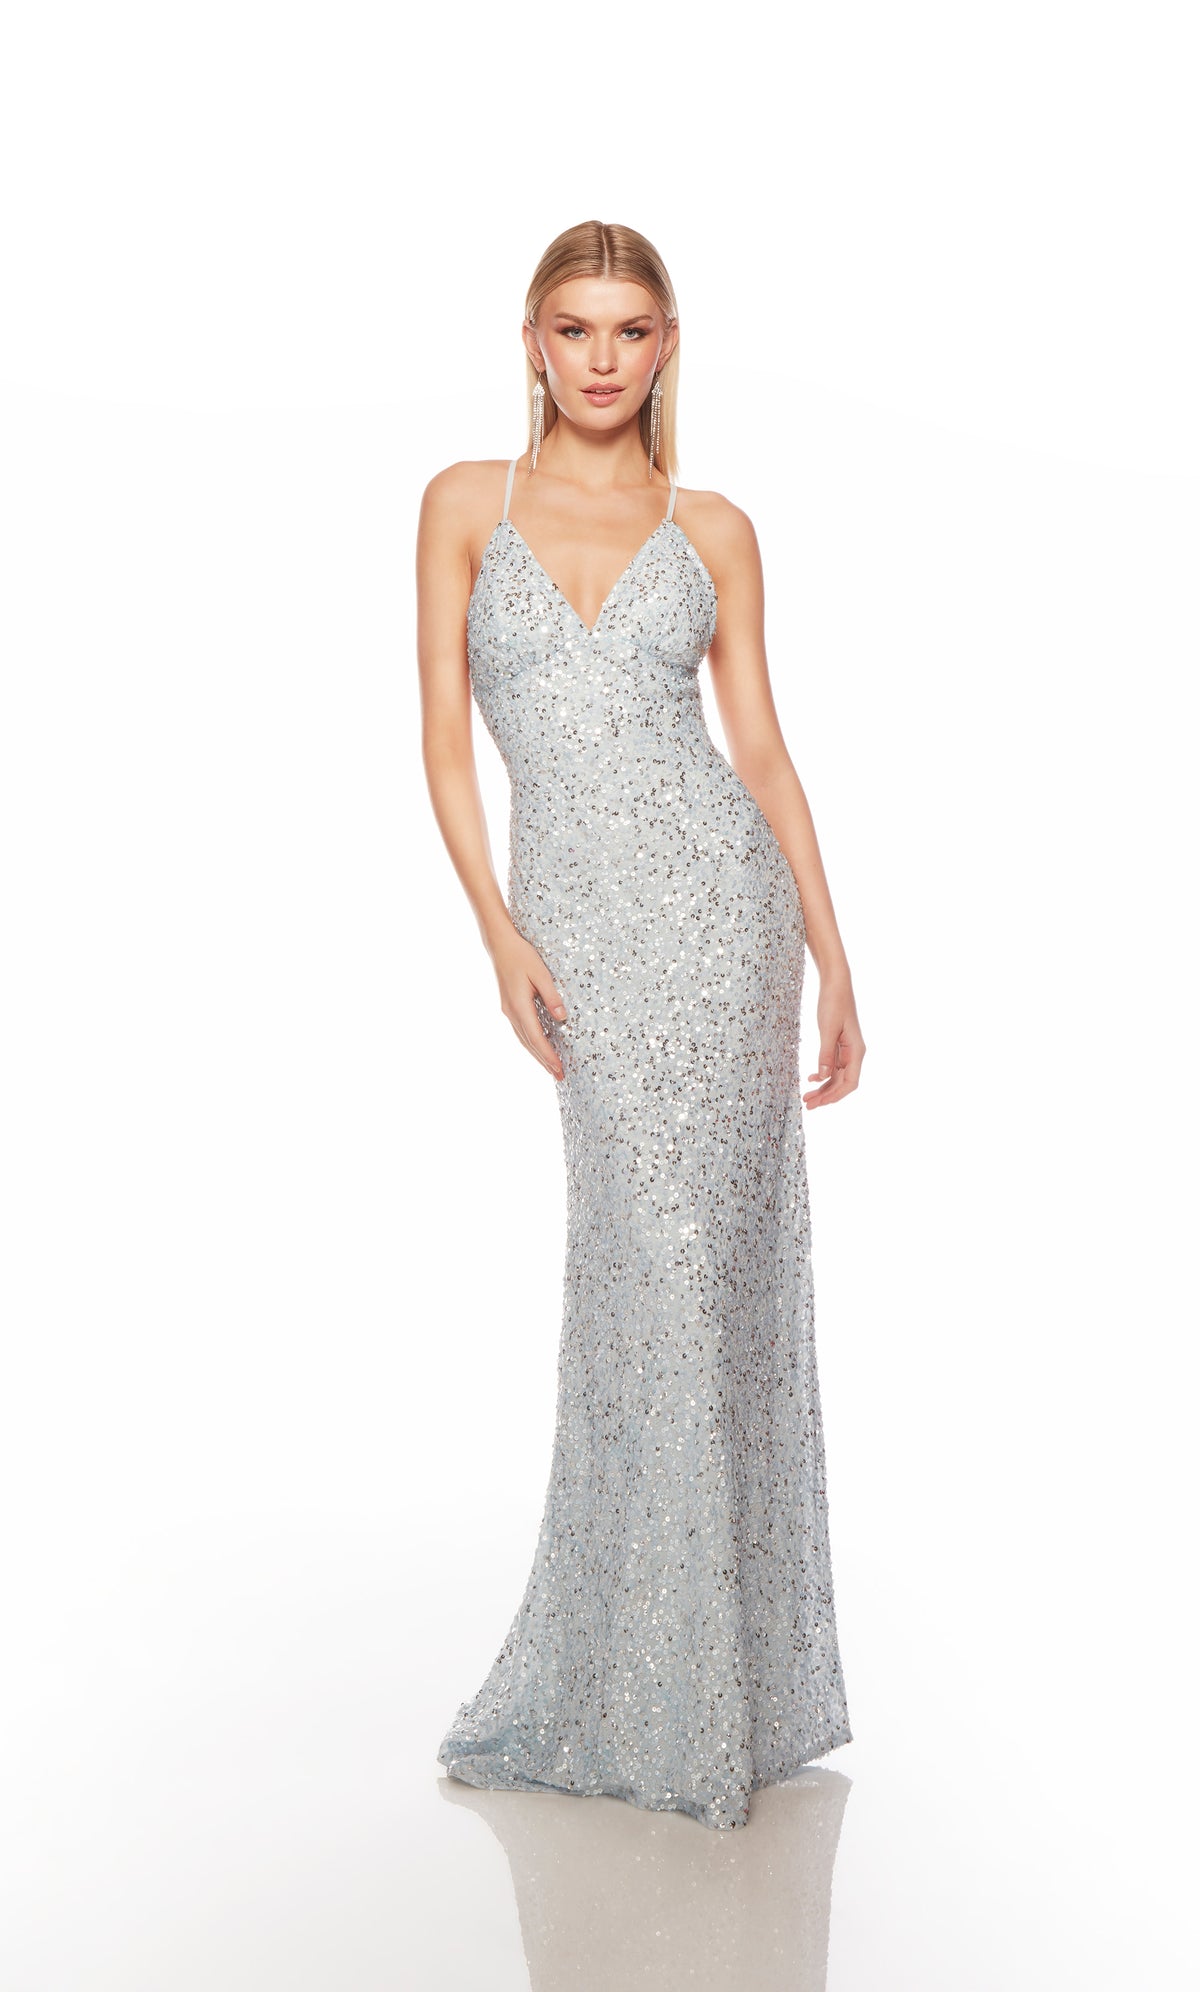 Light blue sequin gown with an V neckline, slit, and crisscross adjustable strap back, and an slight train for an elegant and alluring look.